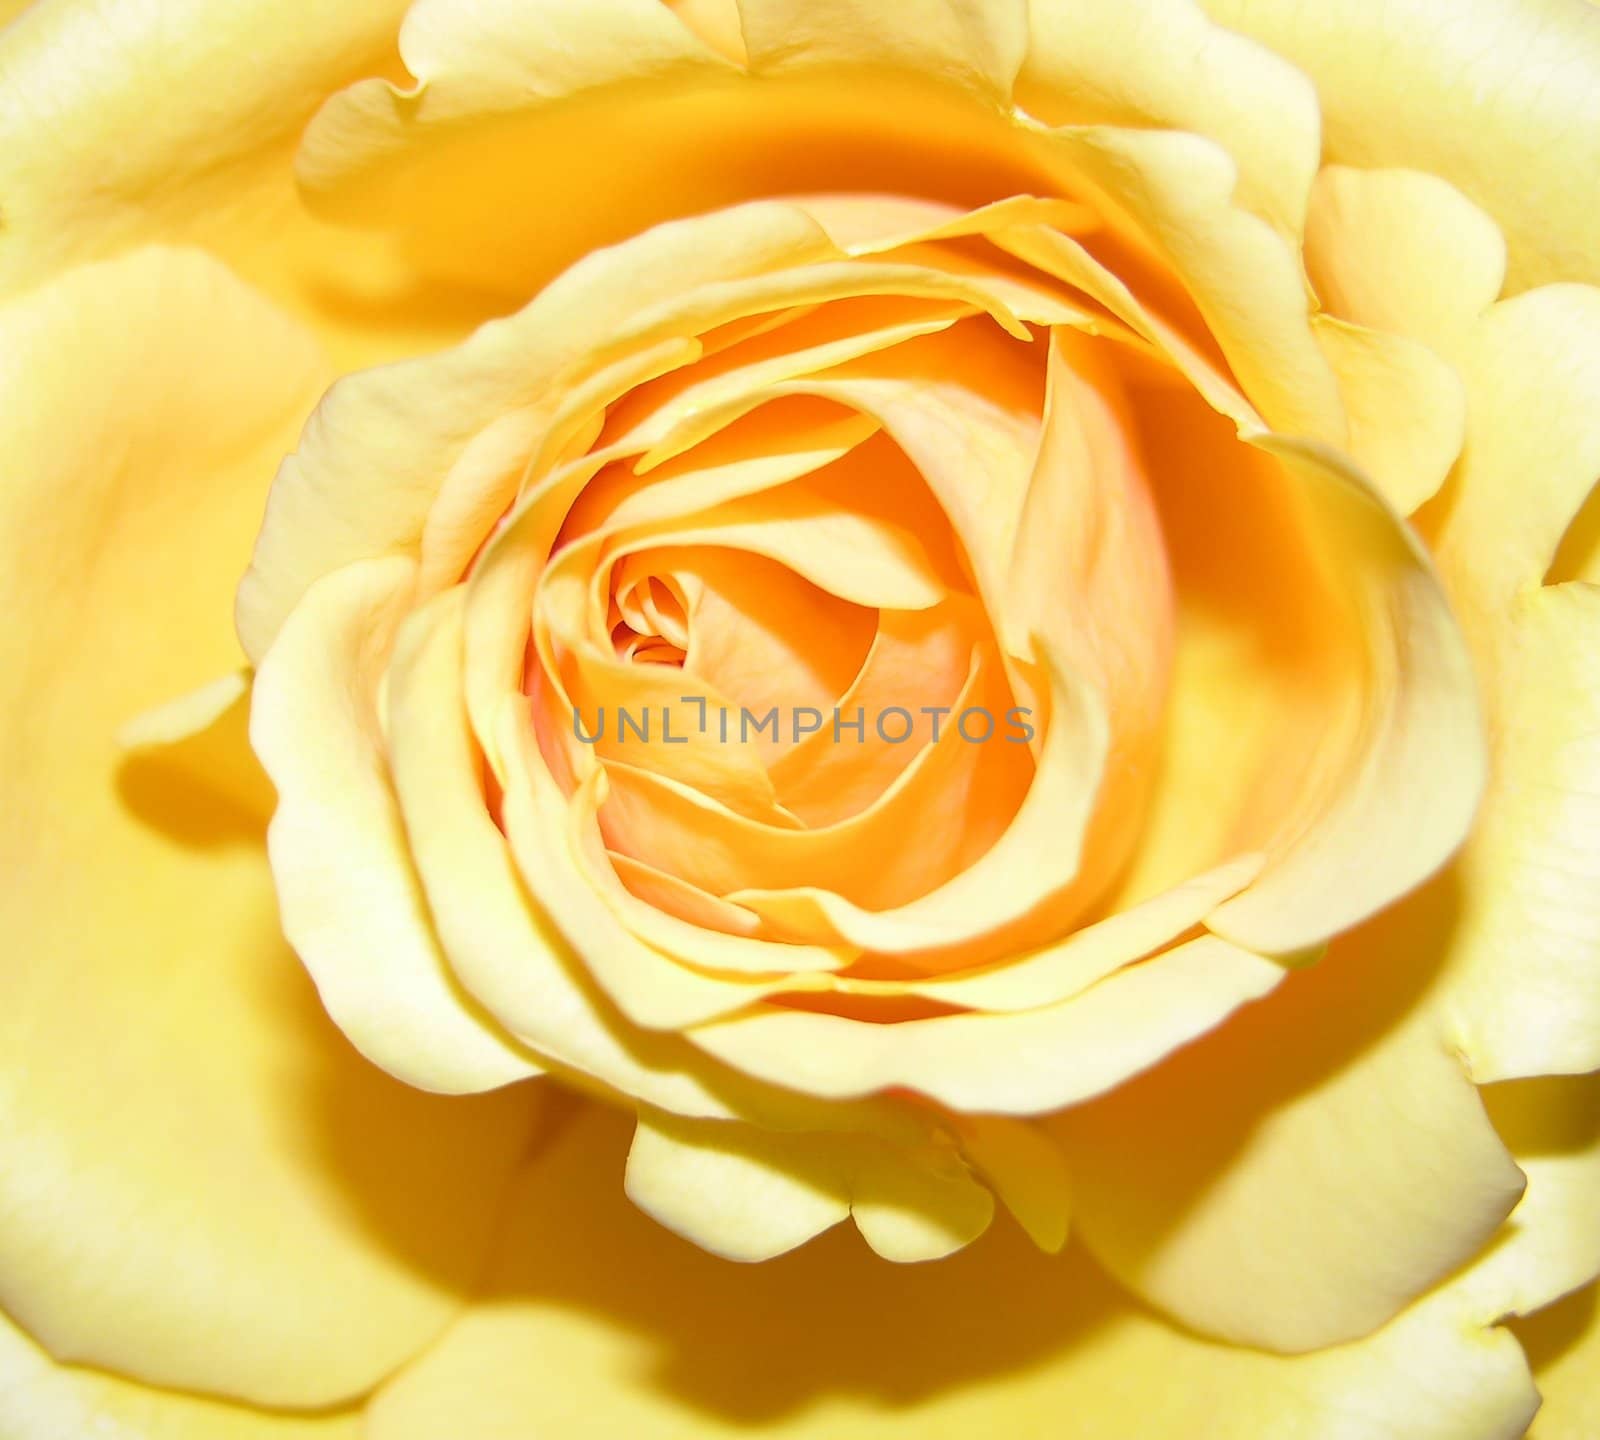 A large yellow rose by northwoodsphoto